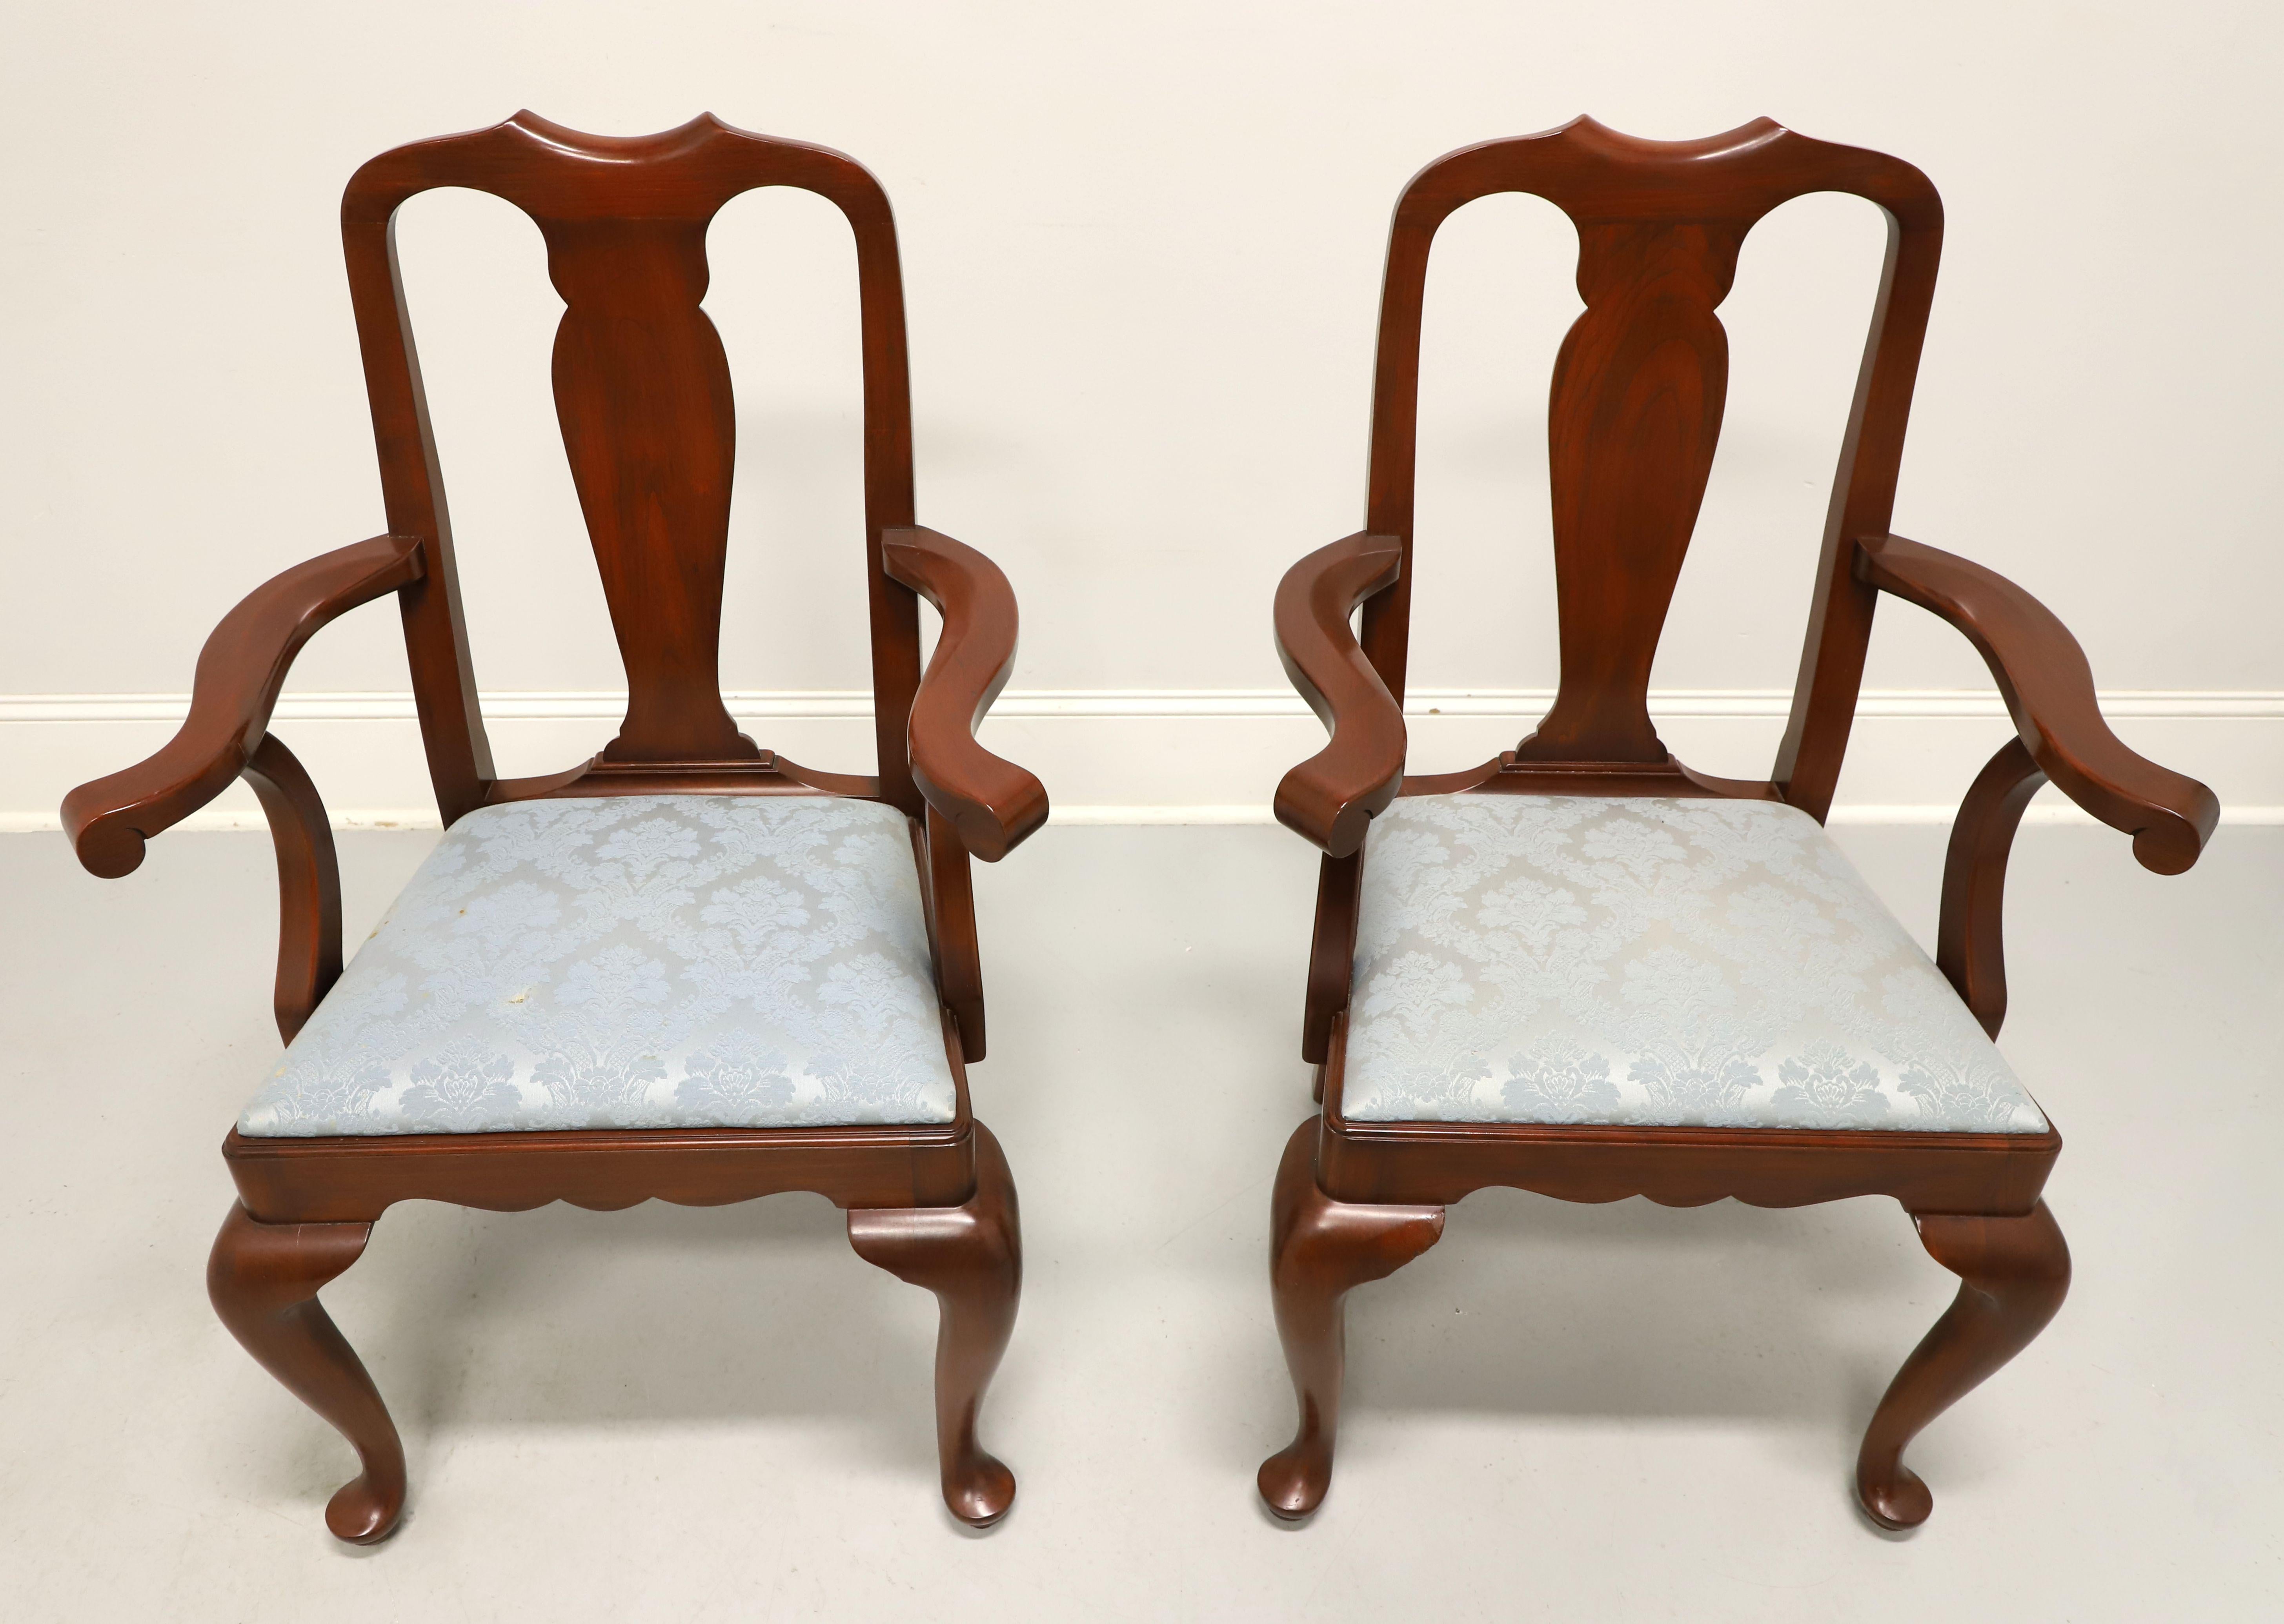 A pair of Queen Anne style dining armchairs by Henkel Harris, of Winchester, Virginia, USA. Solid wild black cherry wood, carved crest rail, carved center backrest, curved arms with arched supports, upholstered seat in a light blue brocade fabric,